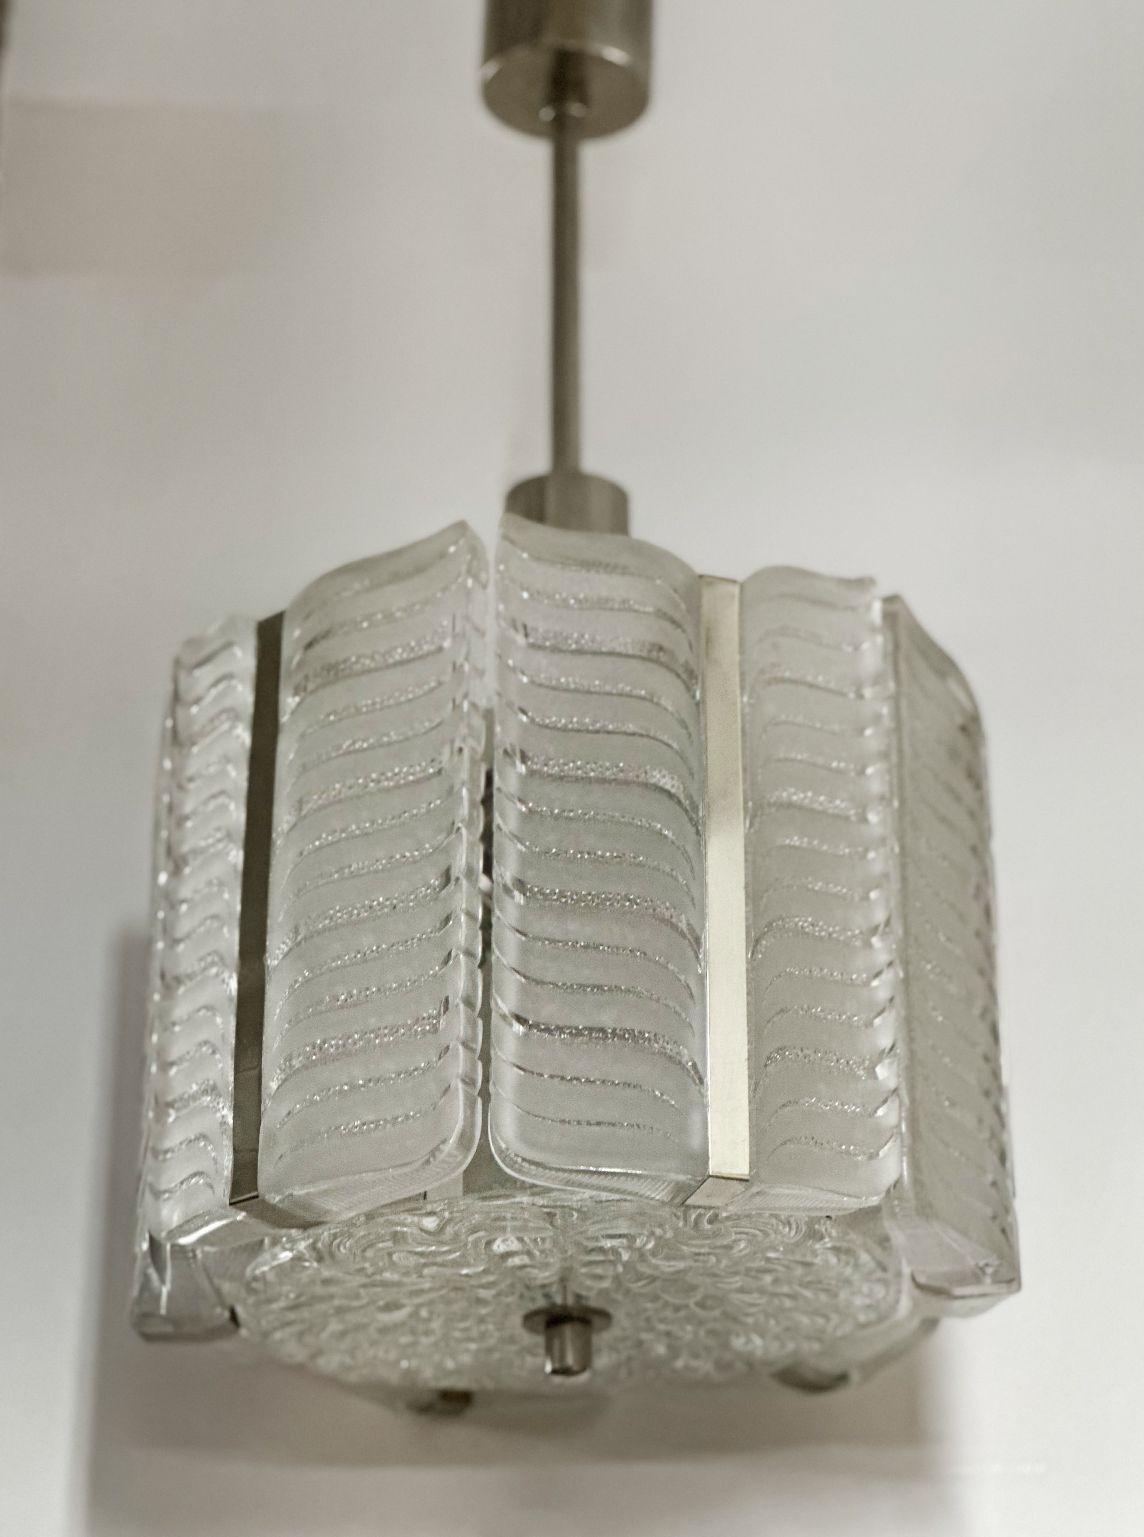 This elegant Austrian chandelier, crafted by Kalmar Vienna in the late 1950s, boasts a nickel-plated metal frame supporting exquisite textured ice glass in a sophisticated Chevron pattern. Its drum-shaped pendant features a round glass disk secured